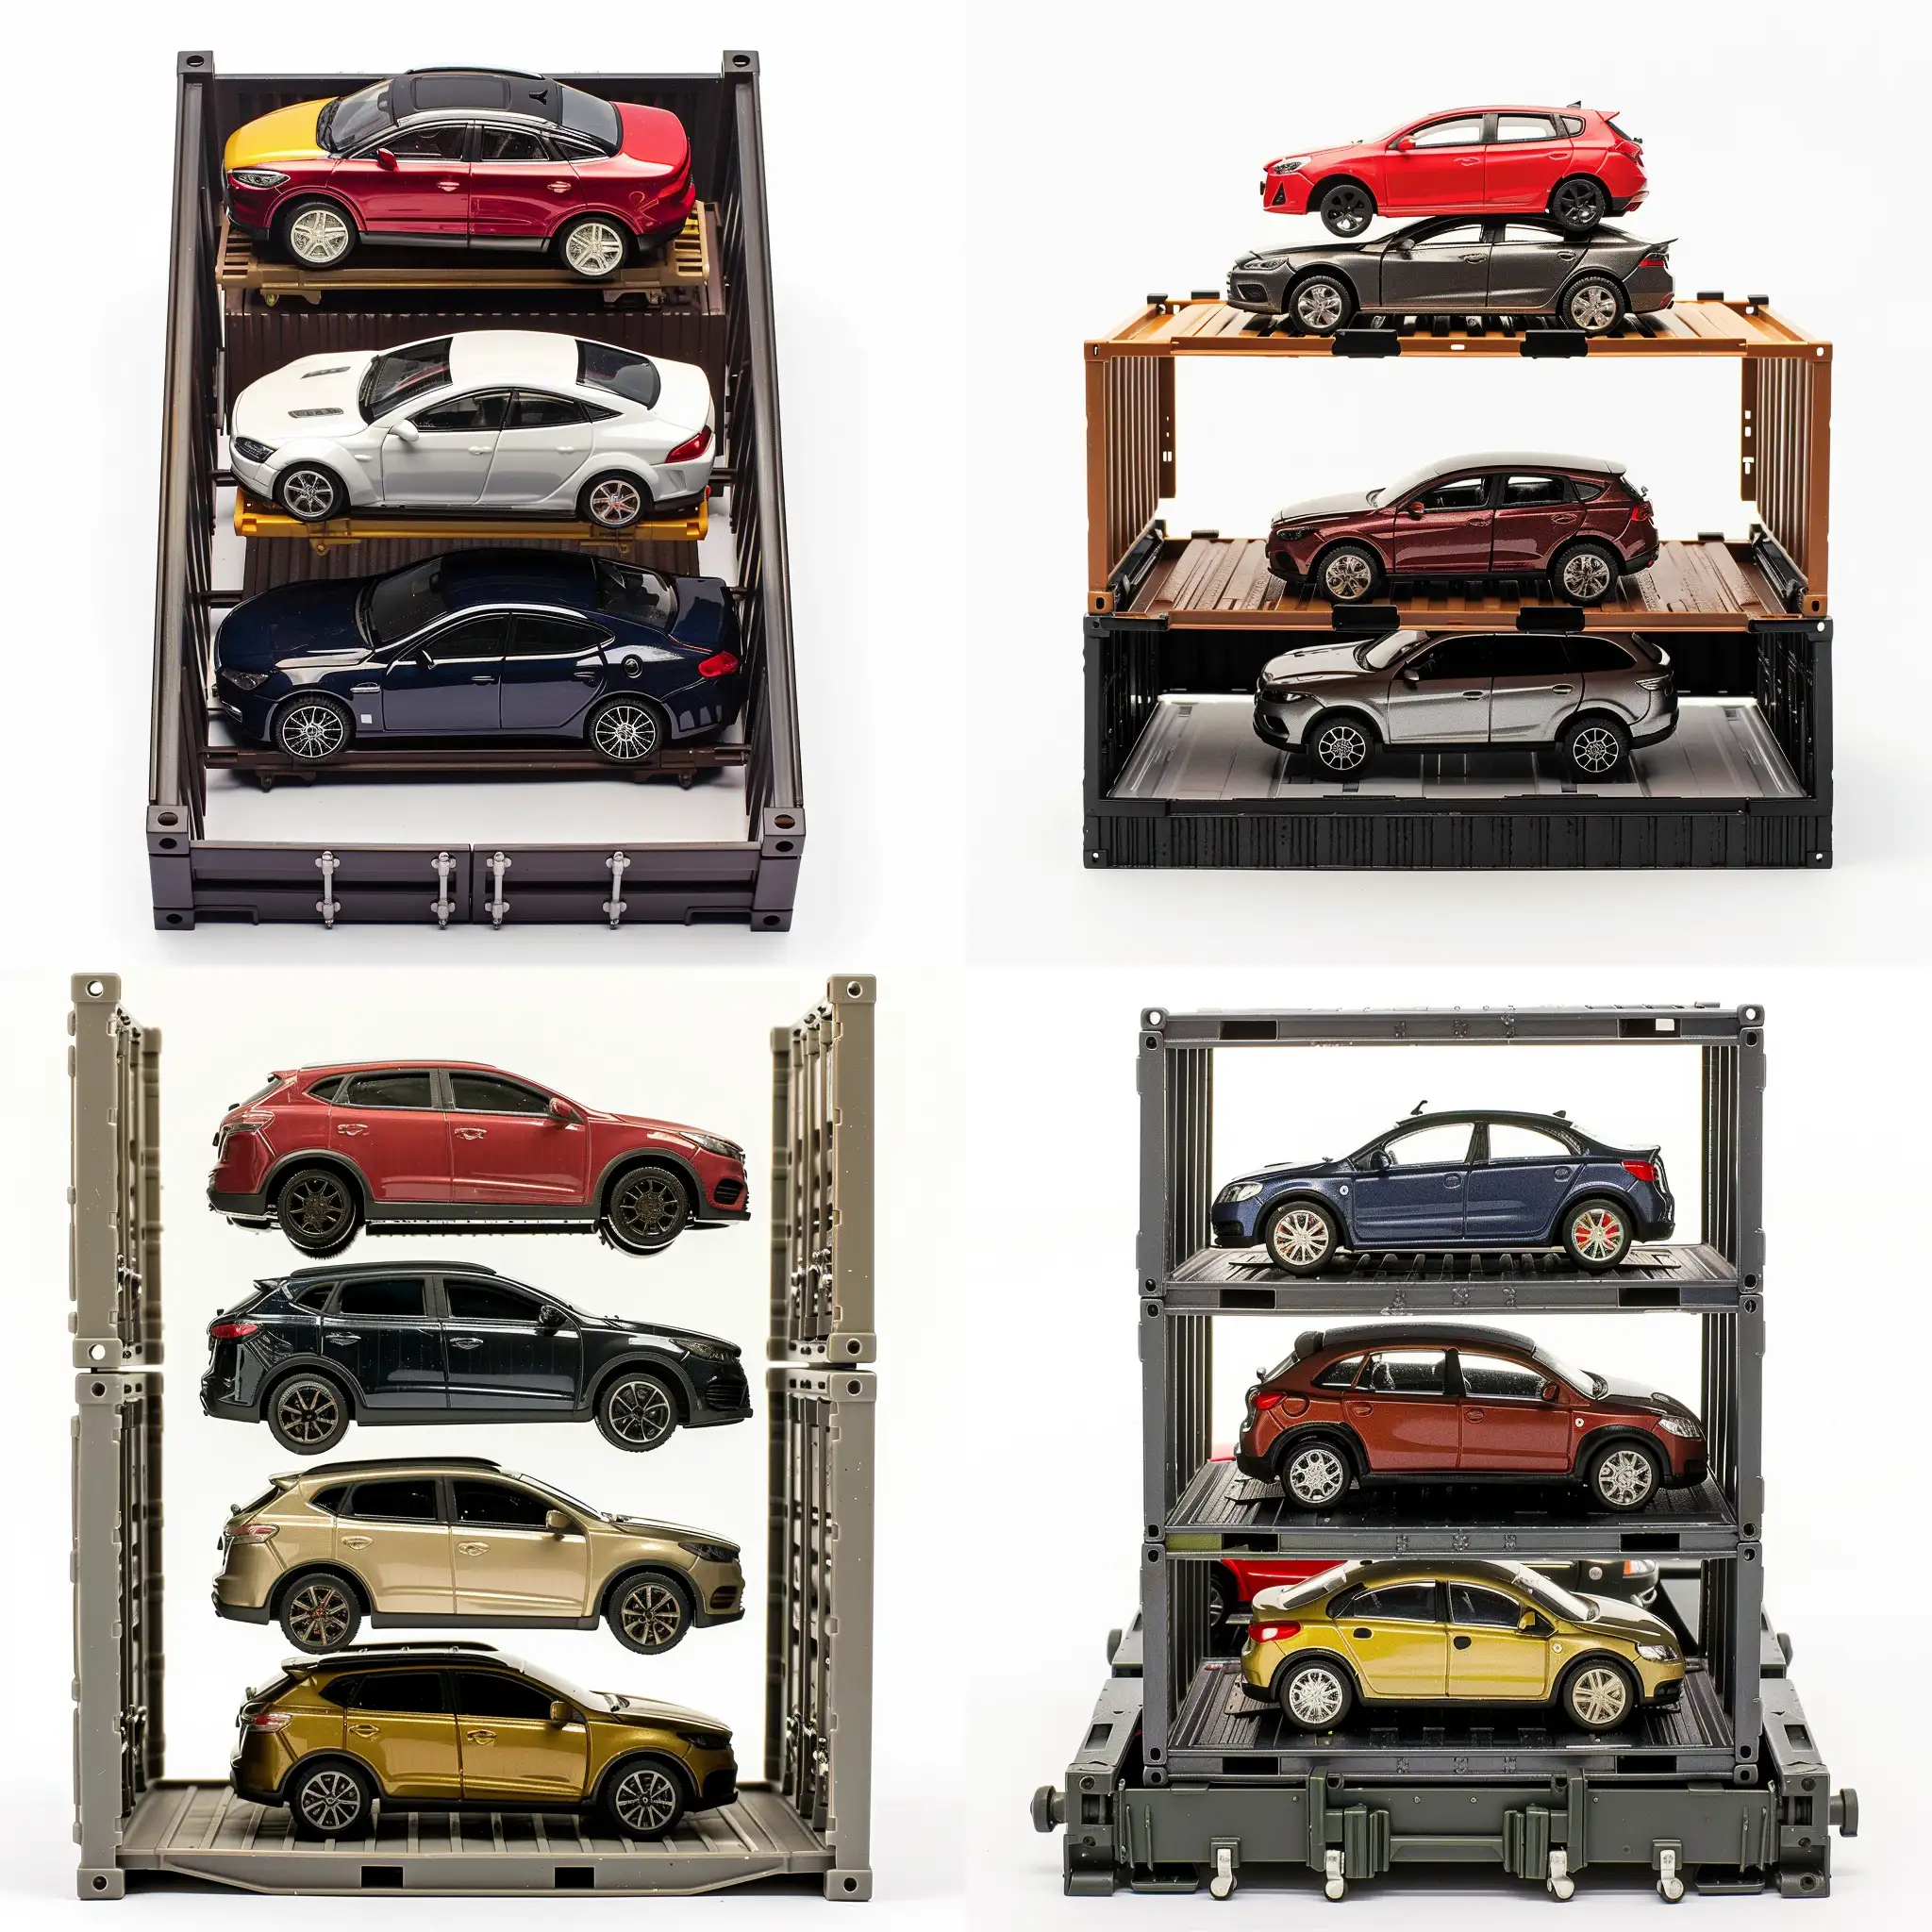 Four-Cars-Stacked-in-a-Container-on-White-Background